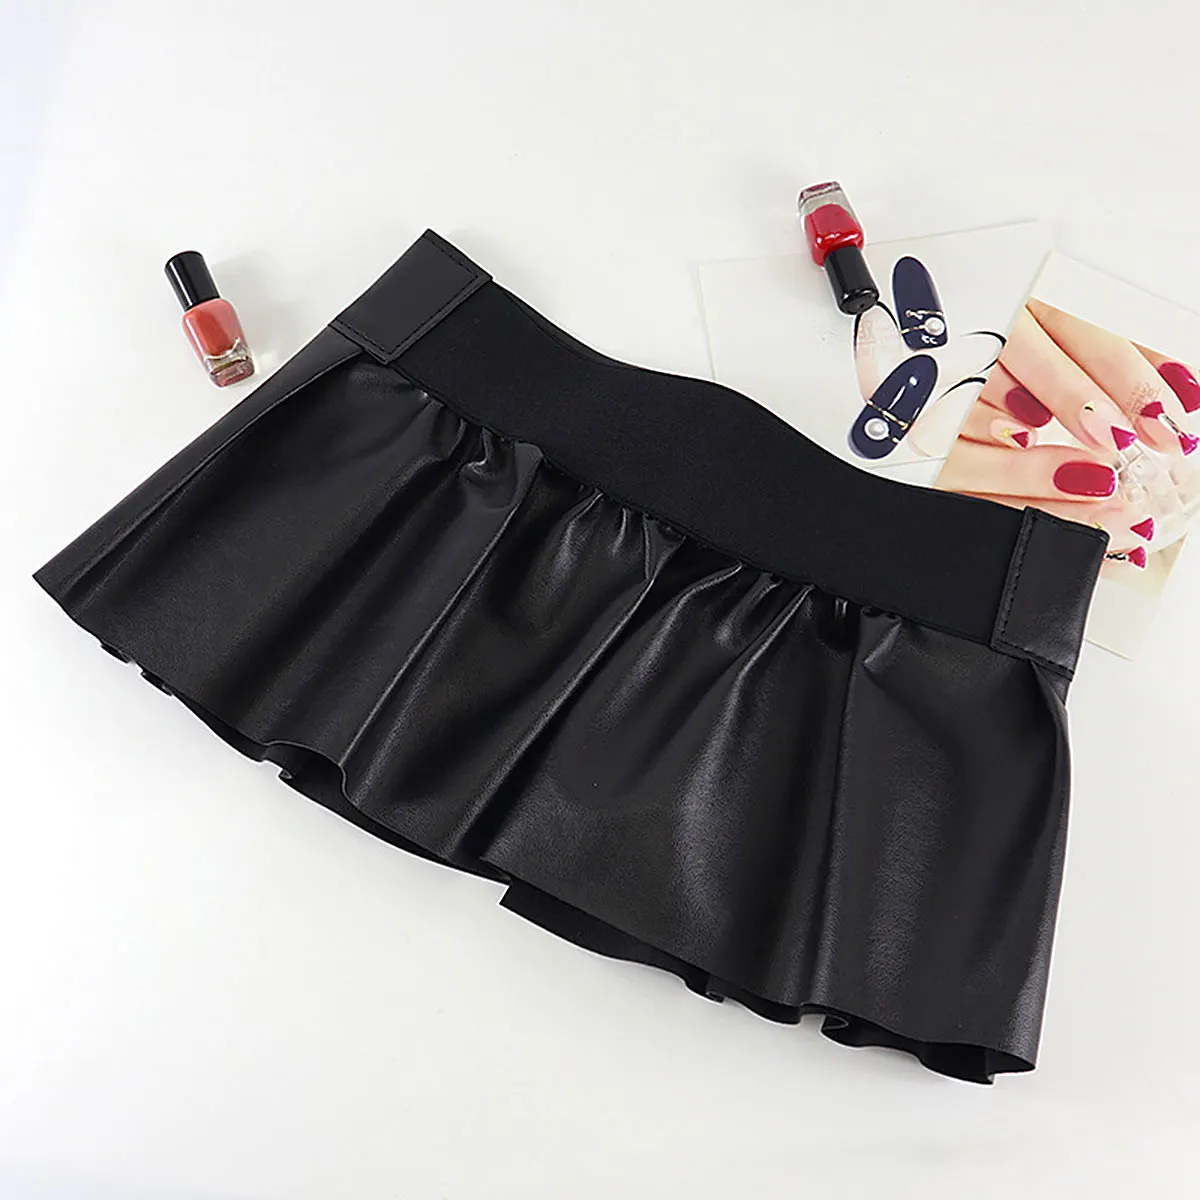 Womens Ladies Sexy Skirts Faux Leather High Waist Front Zipper Pleated Skirts Split Pole Dance Mini Skirt for Parties Clubwear